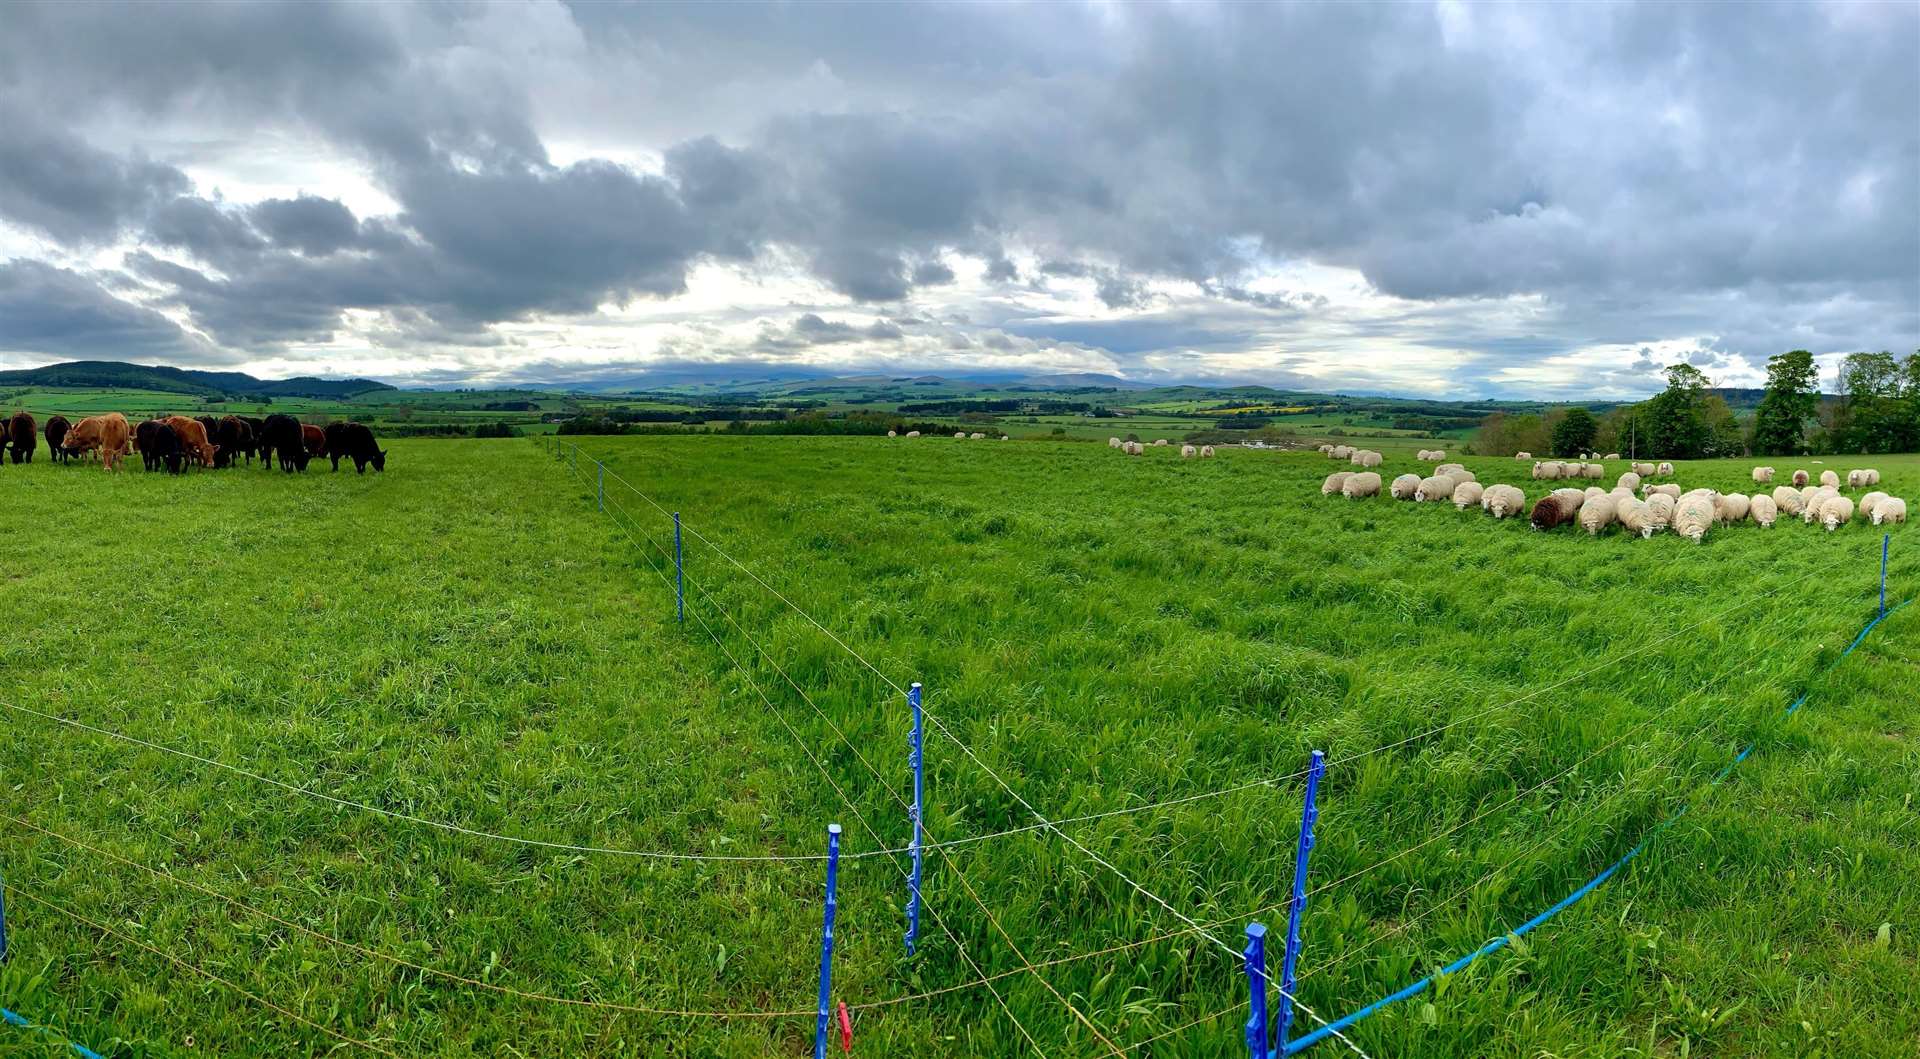 The online event will look at rotational grazing